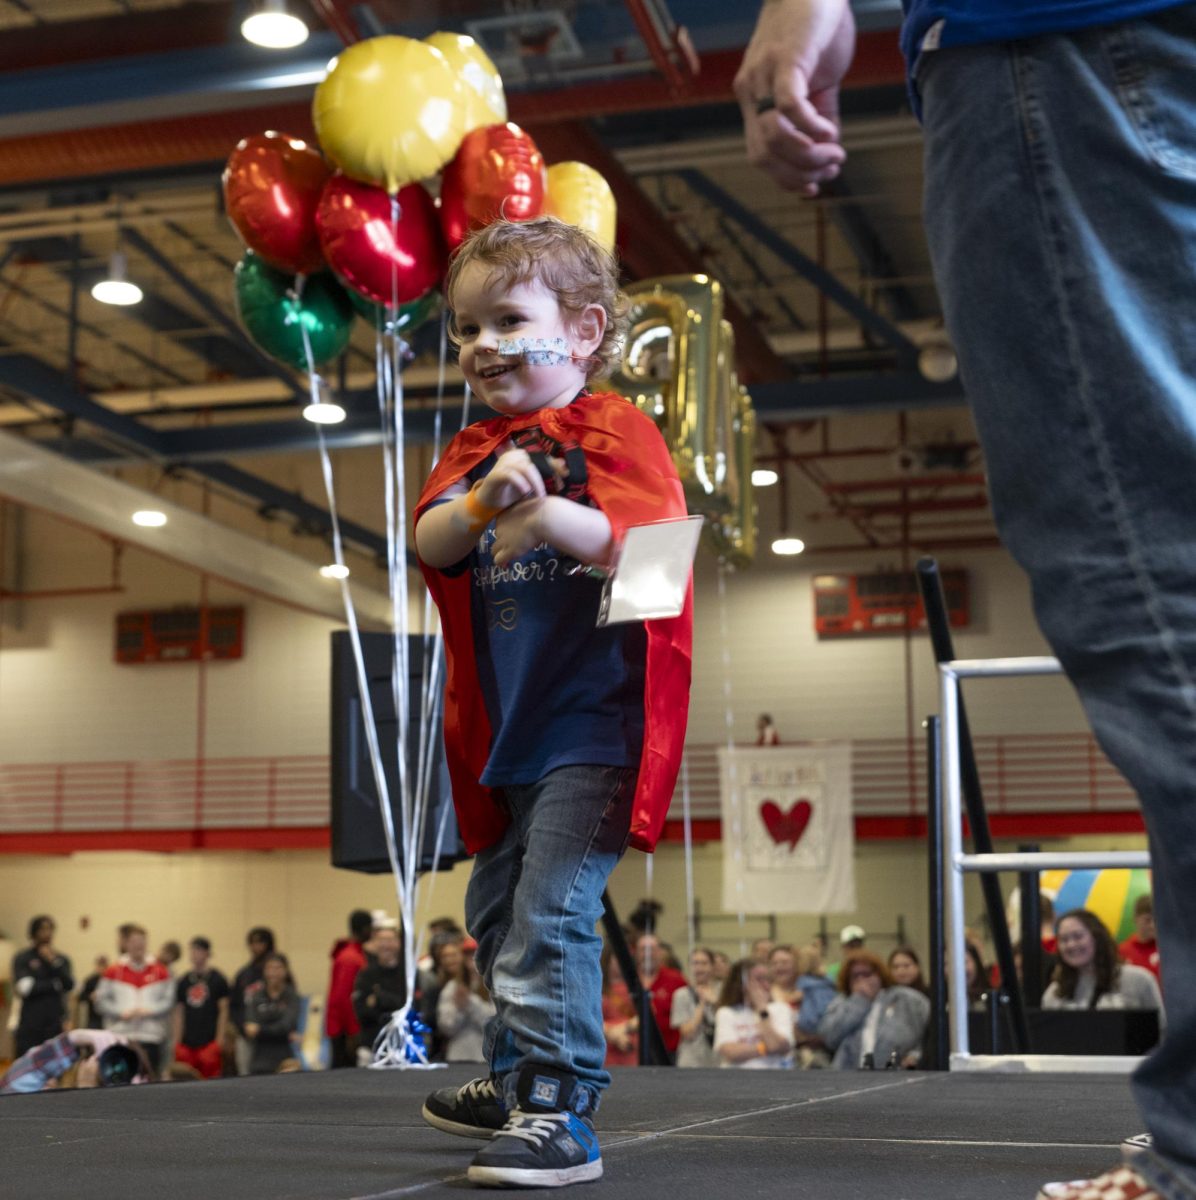 August Baker, 3, dances on stage during his family’s presentation about his involvement during Dance Big Red in Preston Center on Friday, March 8.
